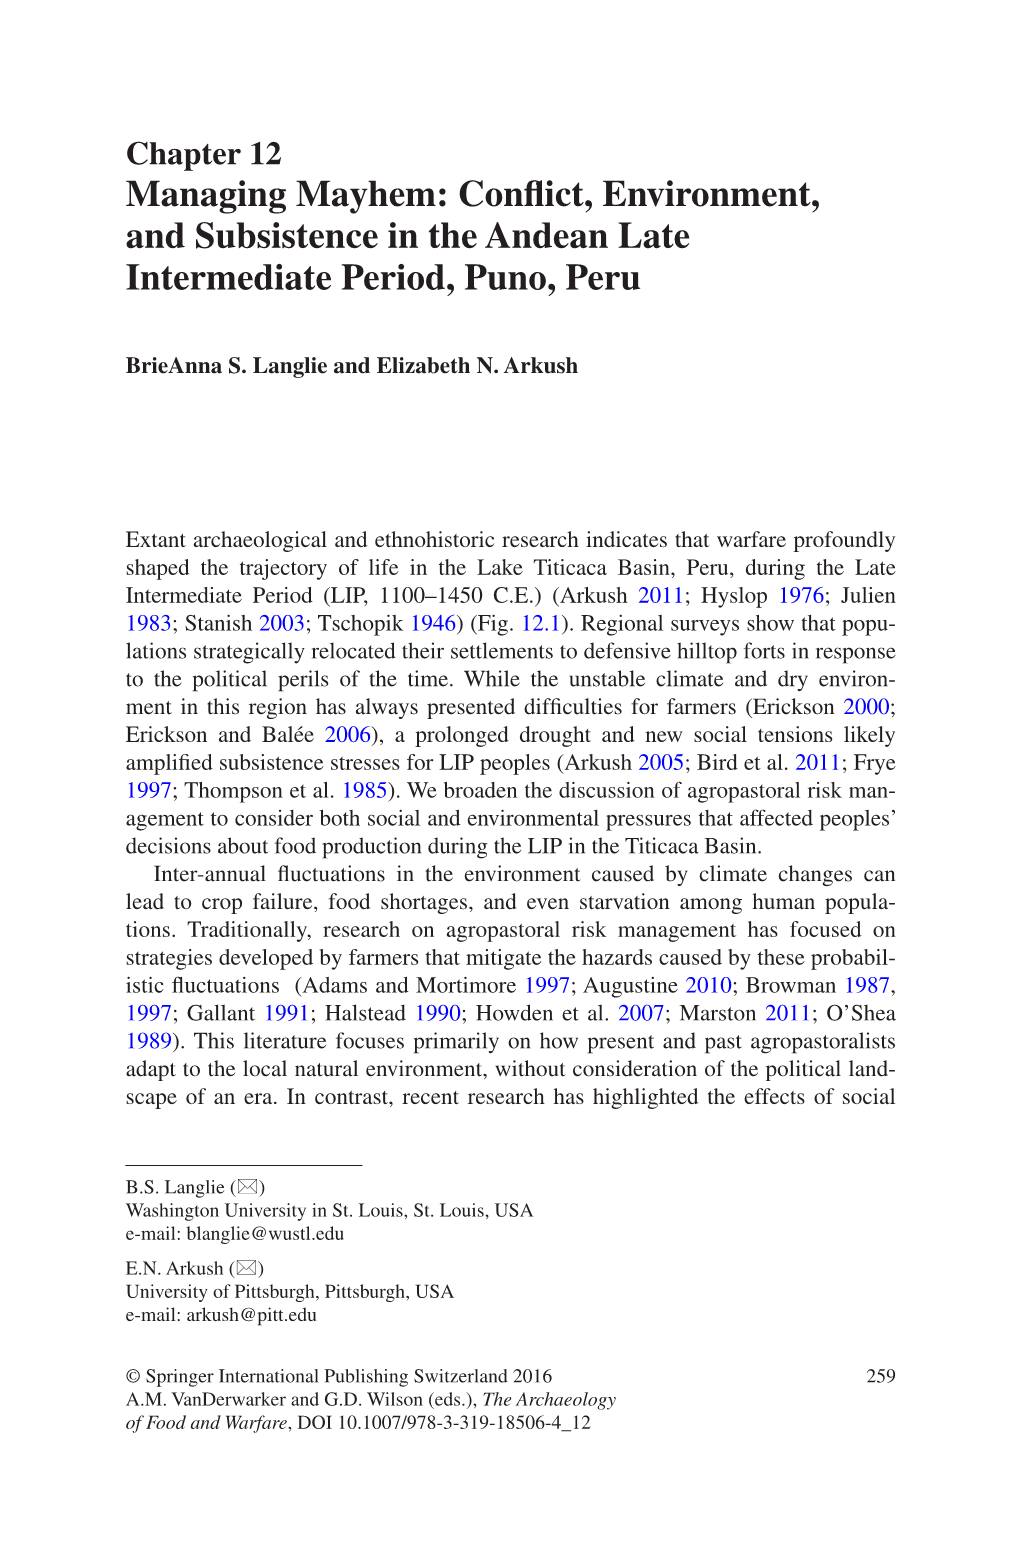 Conflict, Environment, and Subsistence in the Andean Late Intermediate Period, Puno, Peru